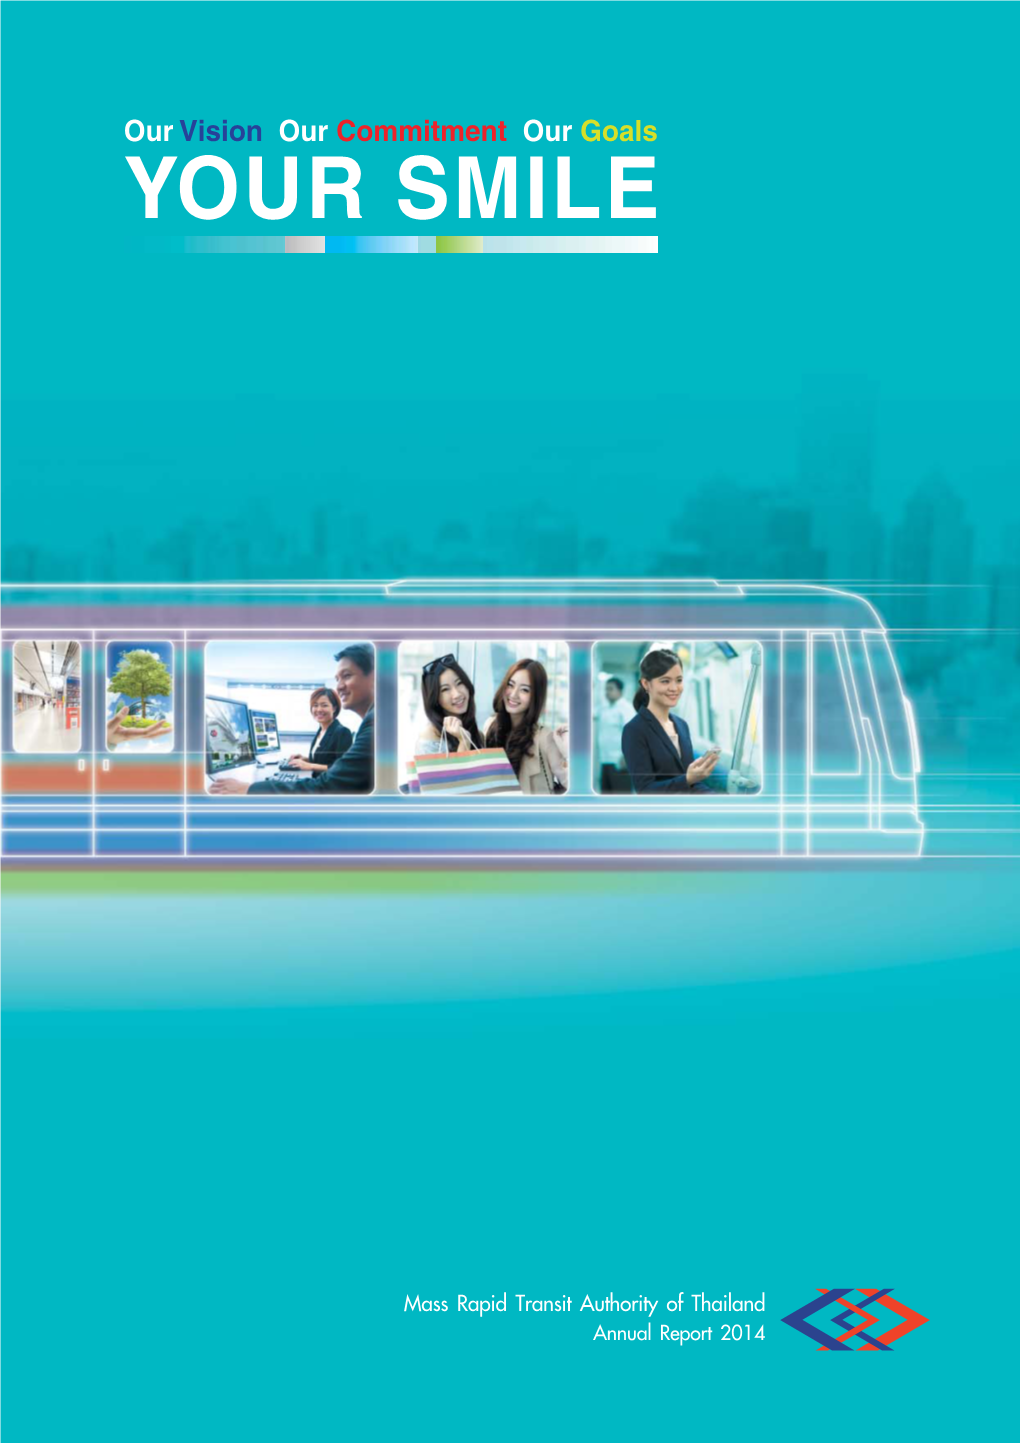 Mass Rapid Transit Authority of Thailand Annual Report 2014 Contents